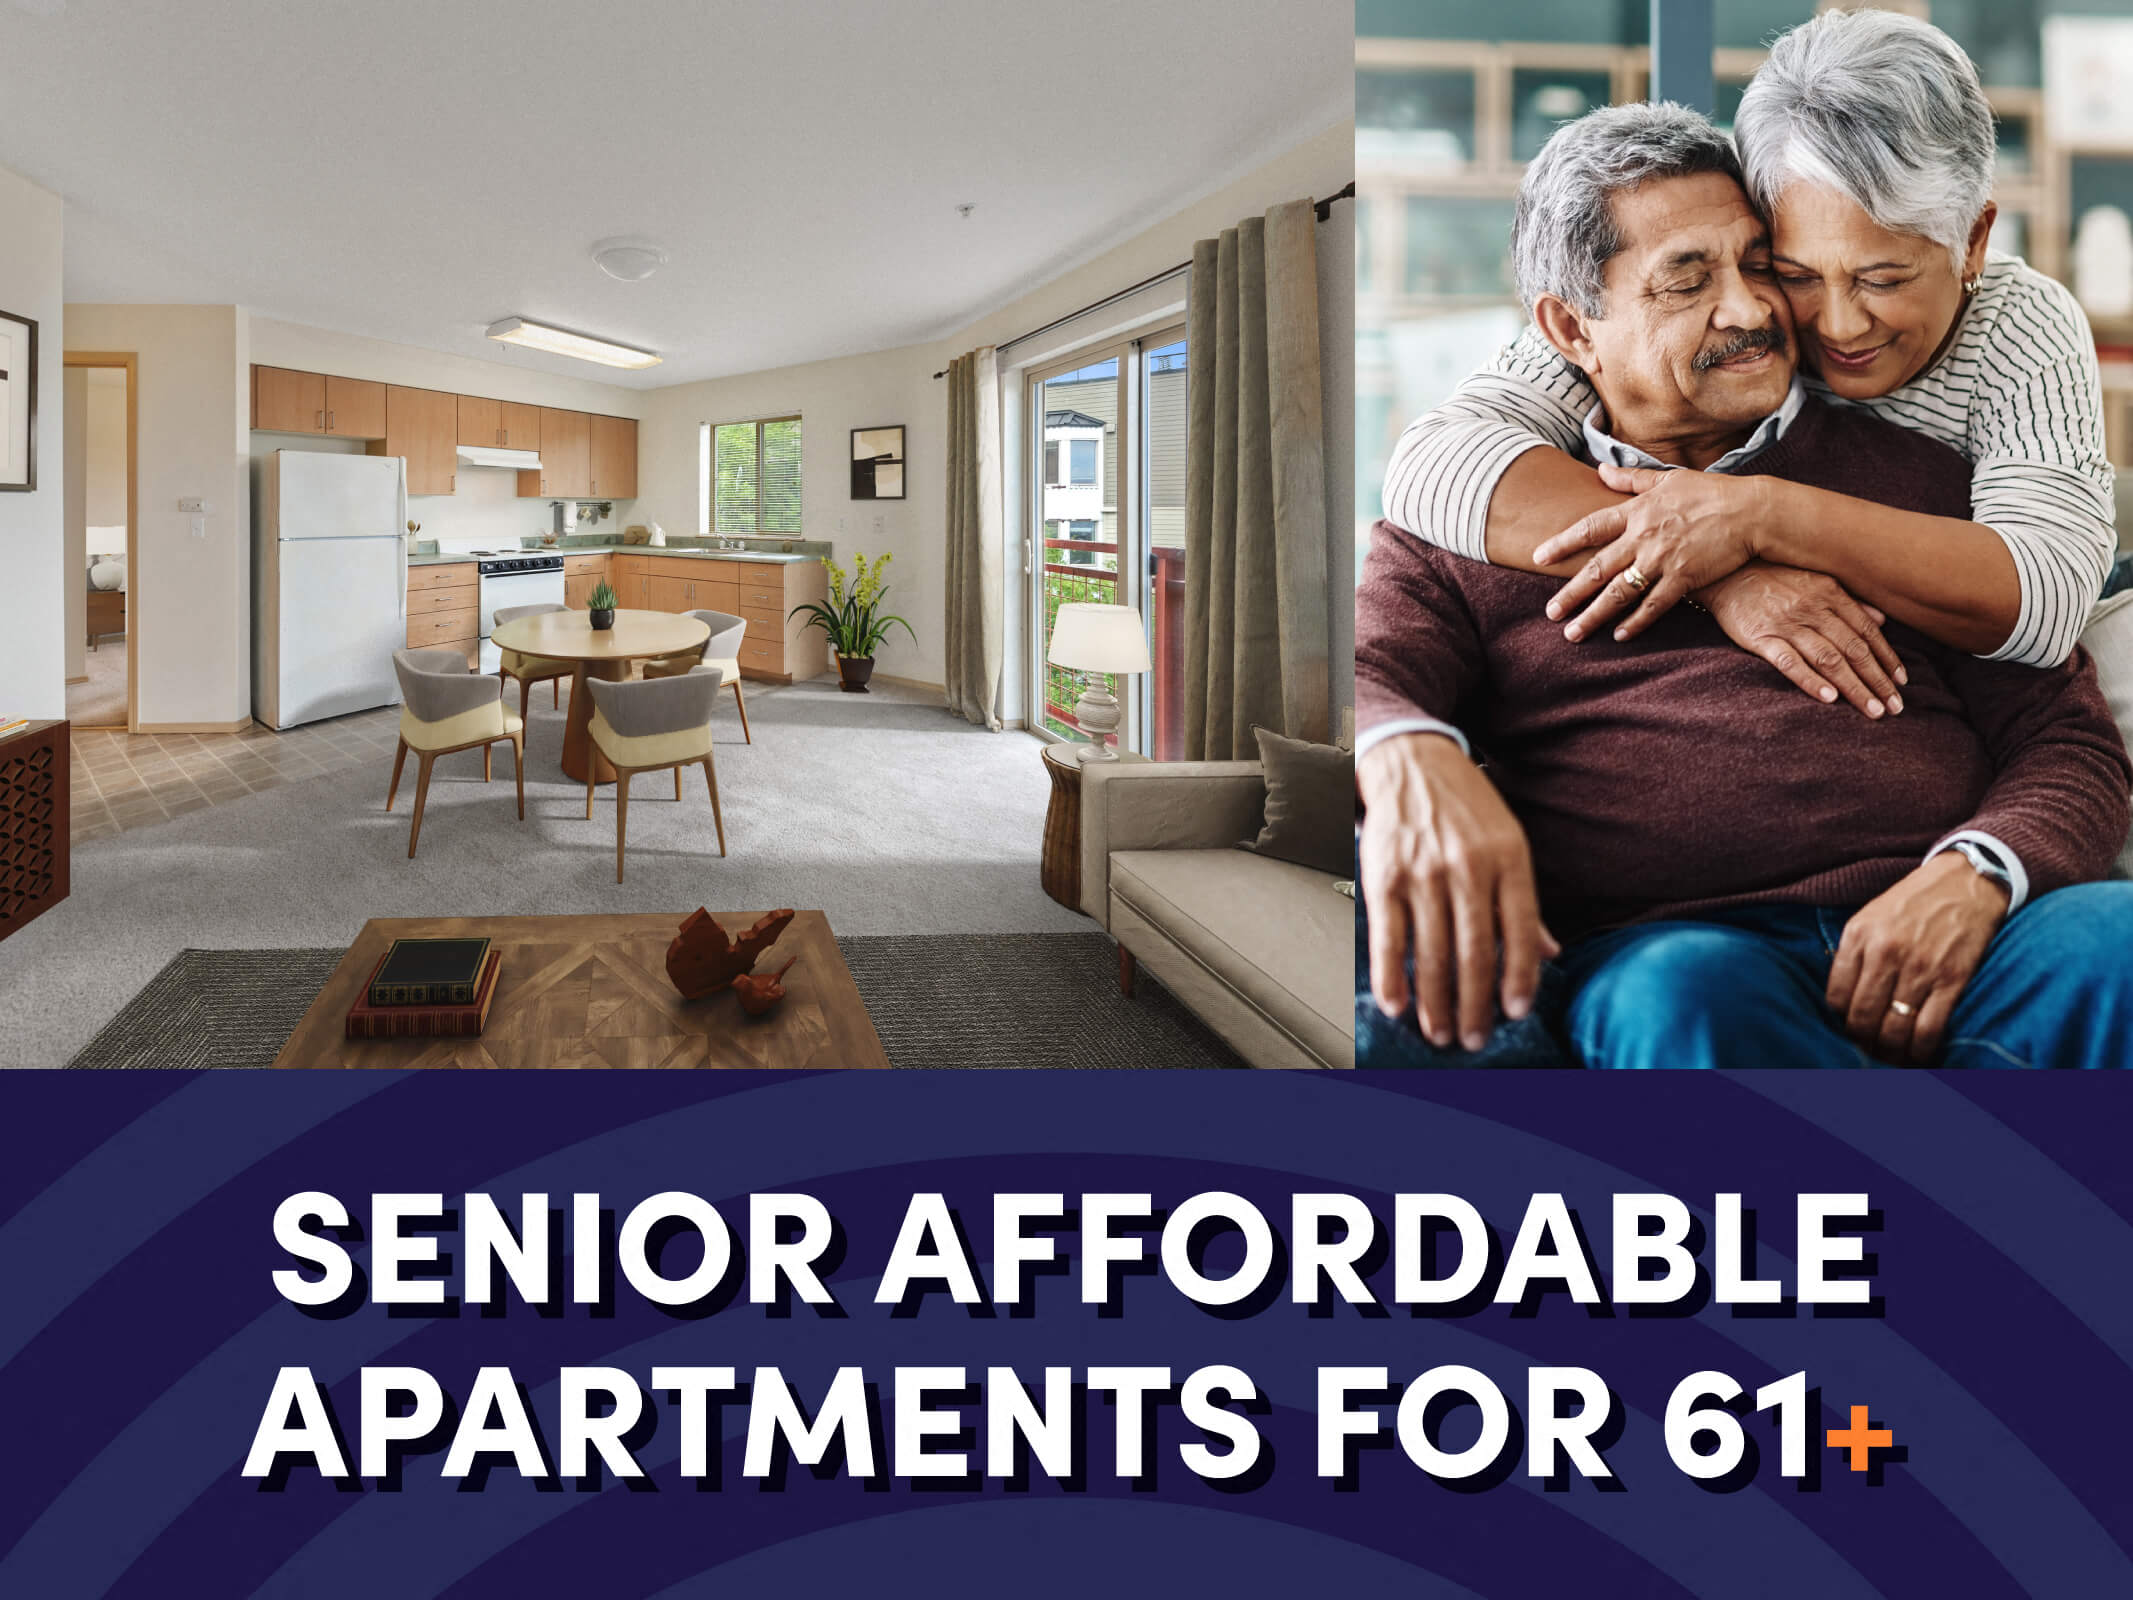 An image of a living room overlooking the kitchen next to an image of a senior couple hugging above text that reads “Senior Affordable Apartments for 61+” for the Washington Terrace Senior Affordable Apartments in Seattle, Washington.